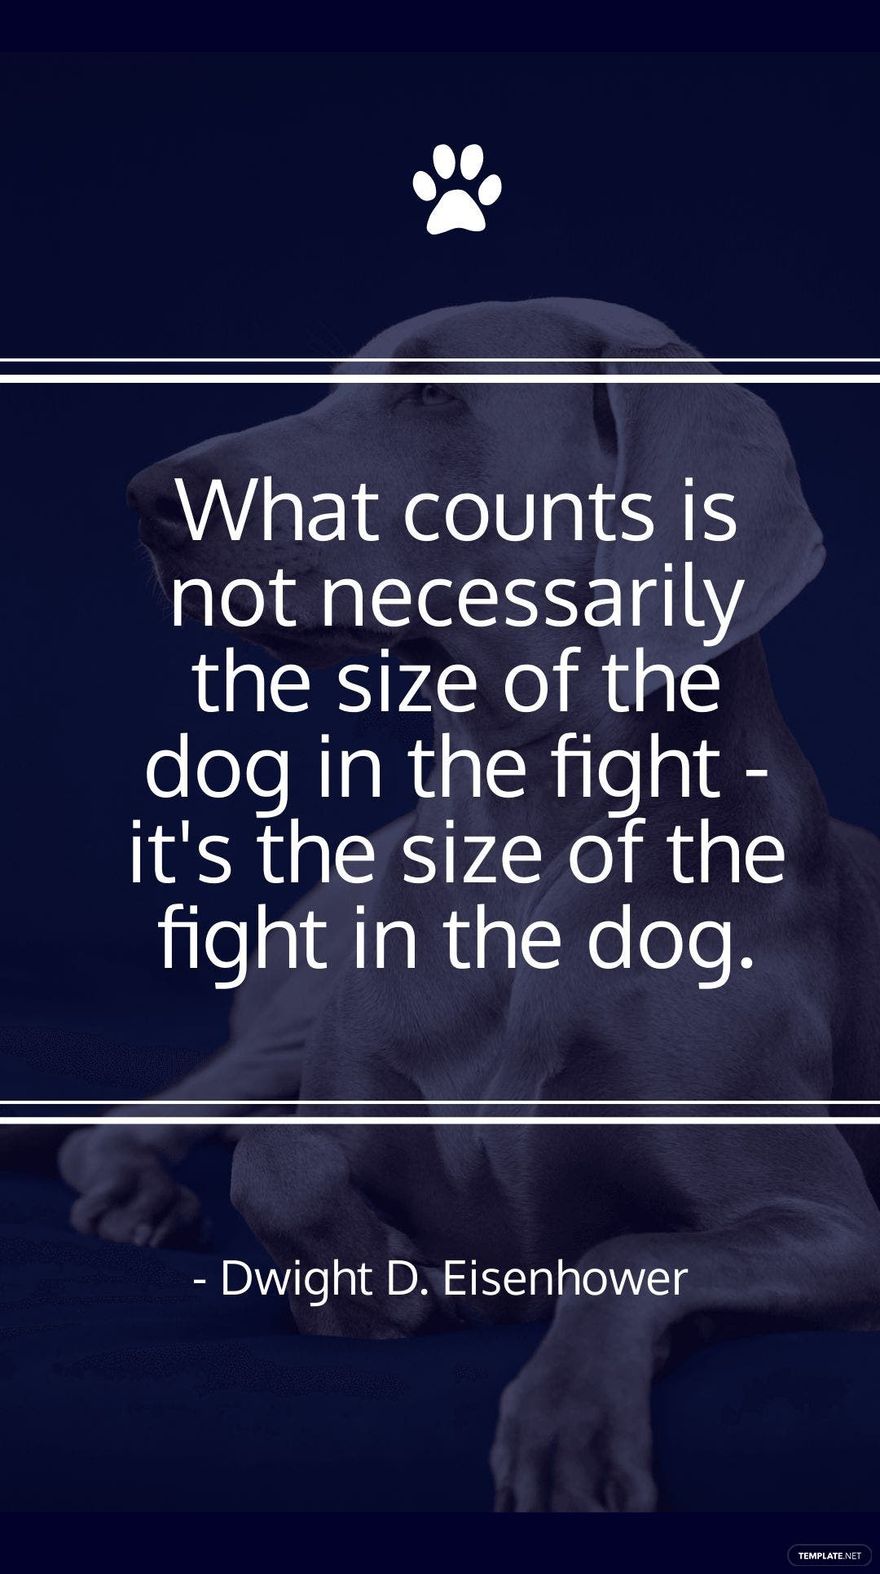 Dwight D. Eisenhower - What counts is not necessarily the size of the dog in the fight - it's the size of the fight in the dog.